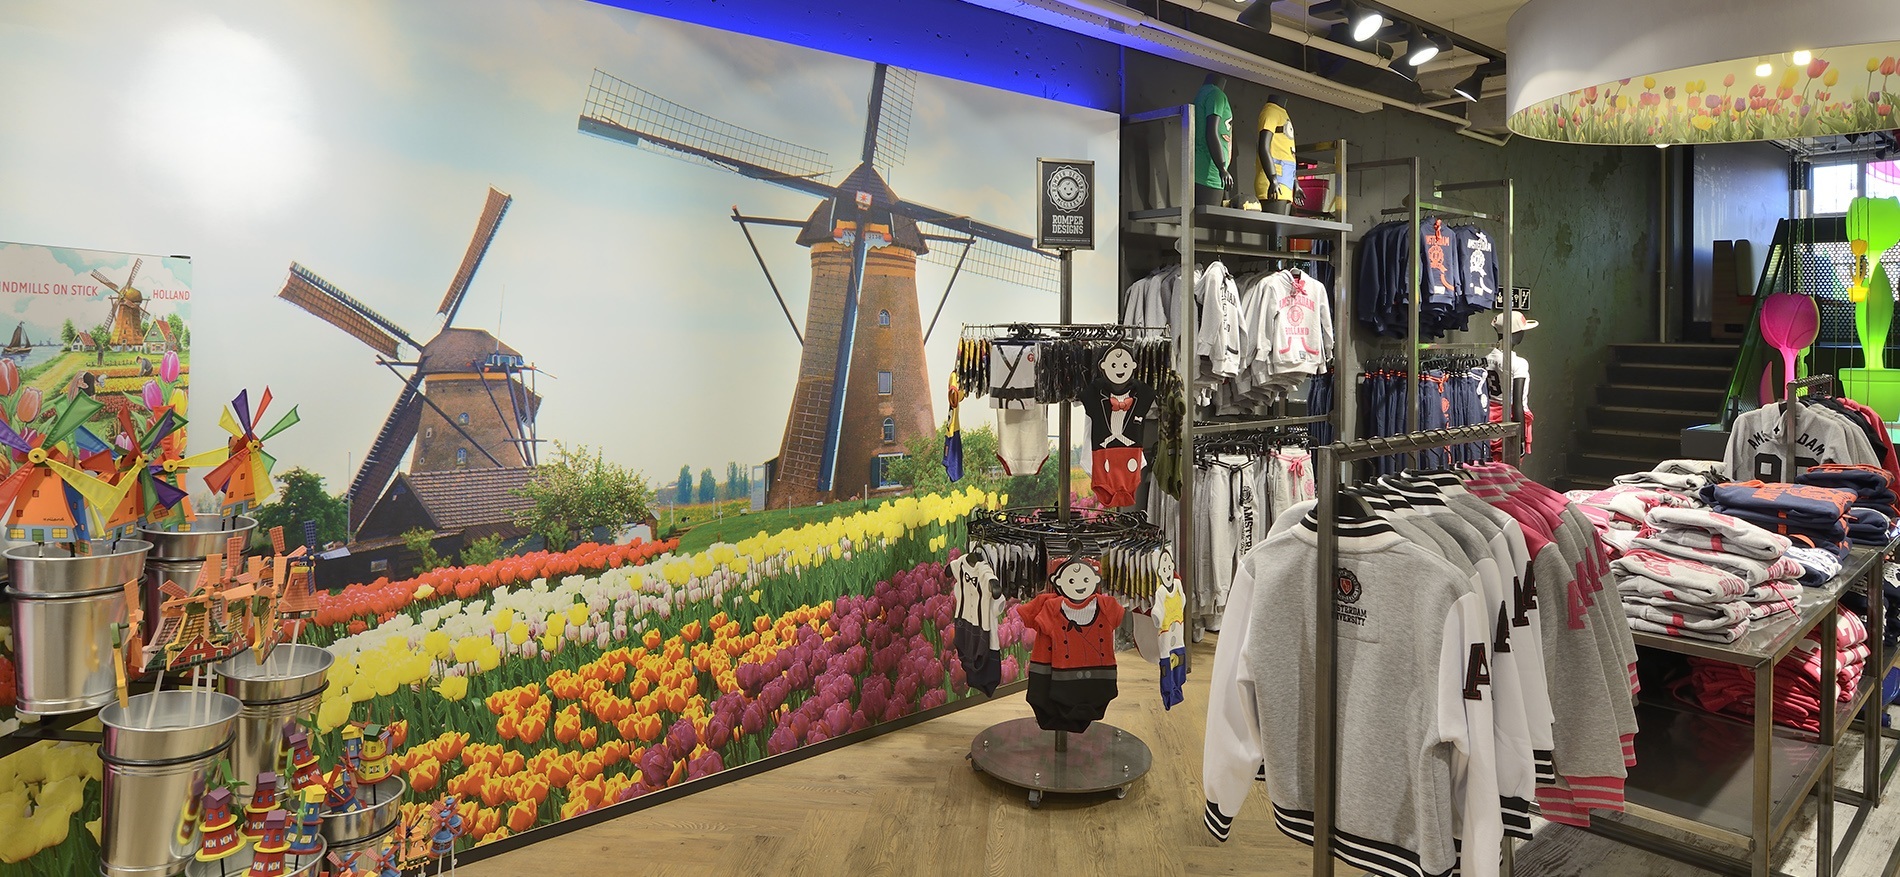 Shopping is toll: Amsterdam Designs - Mode